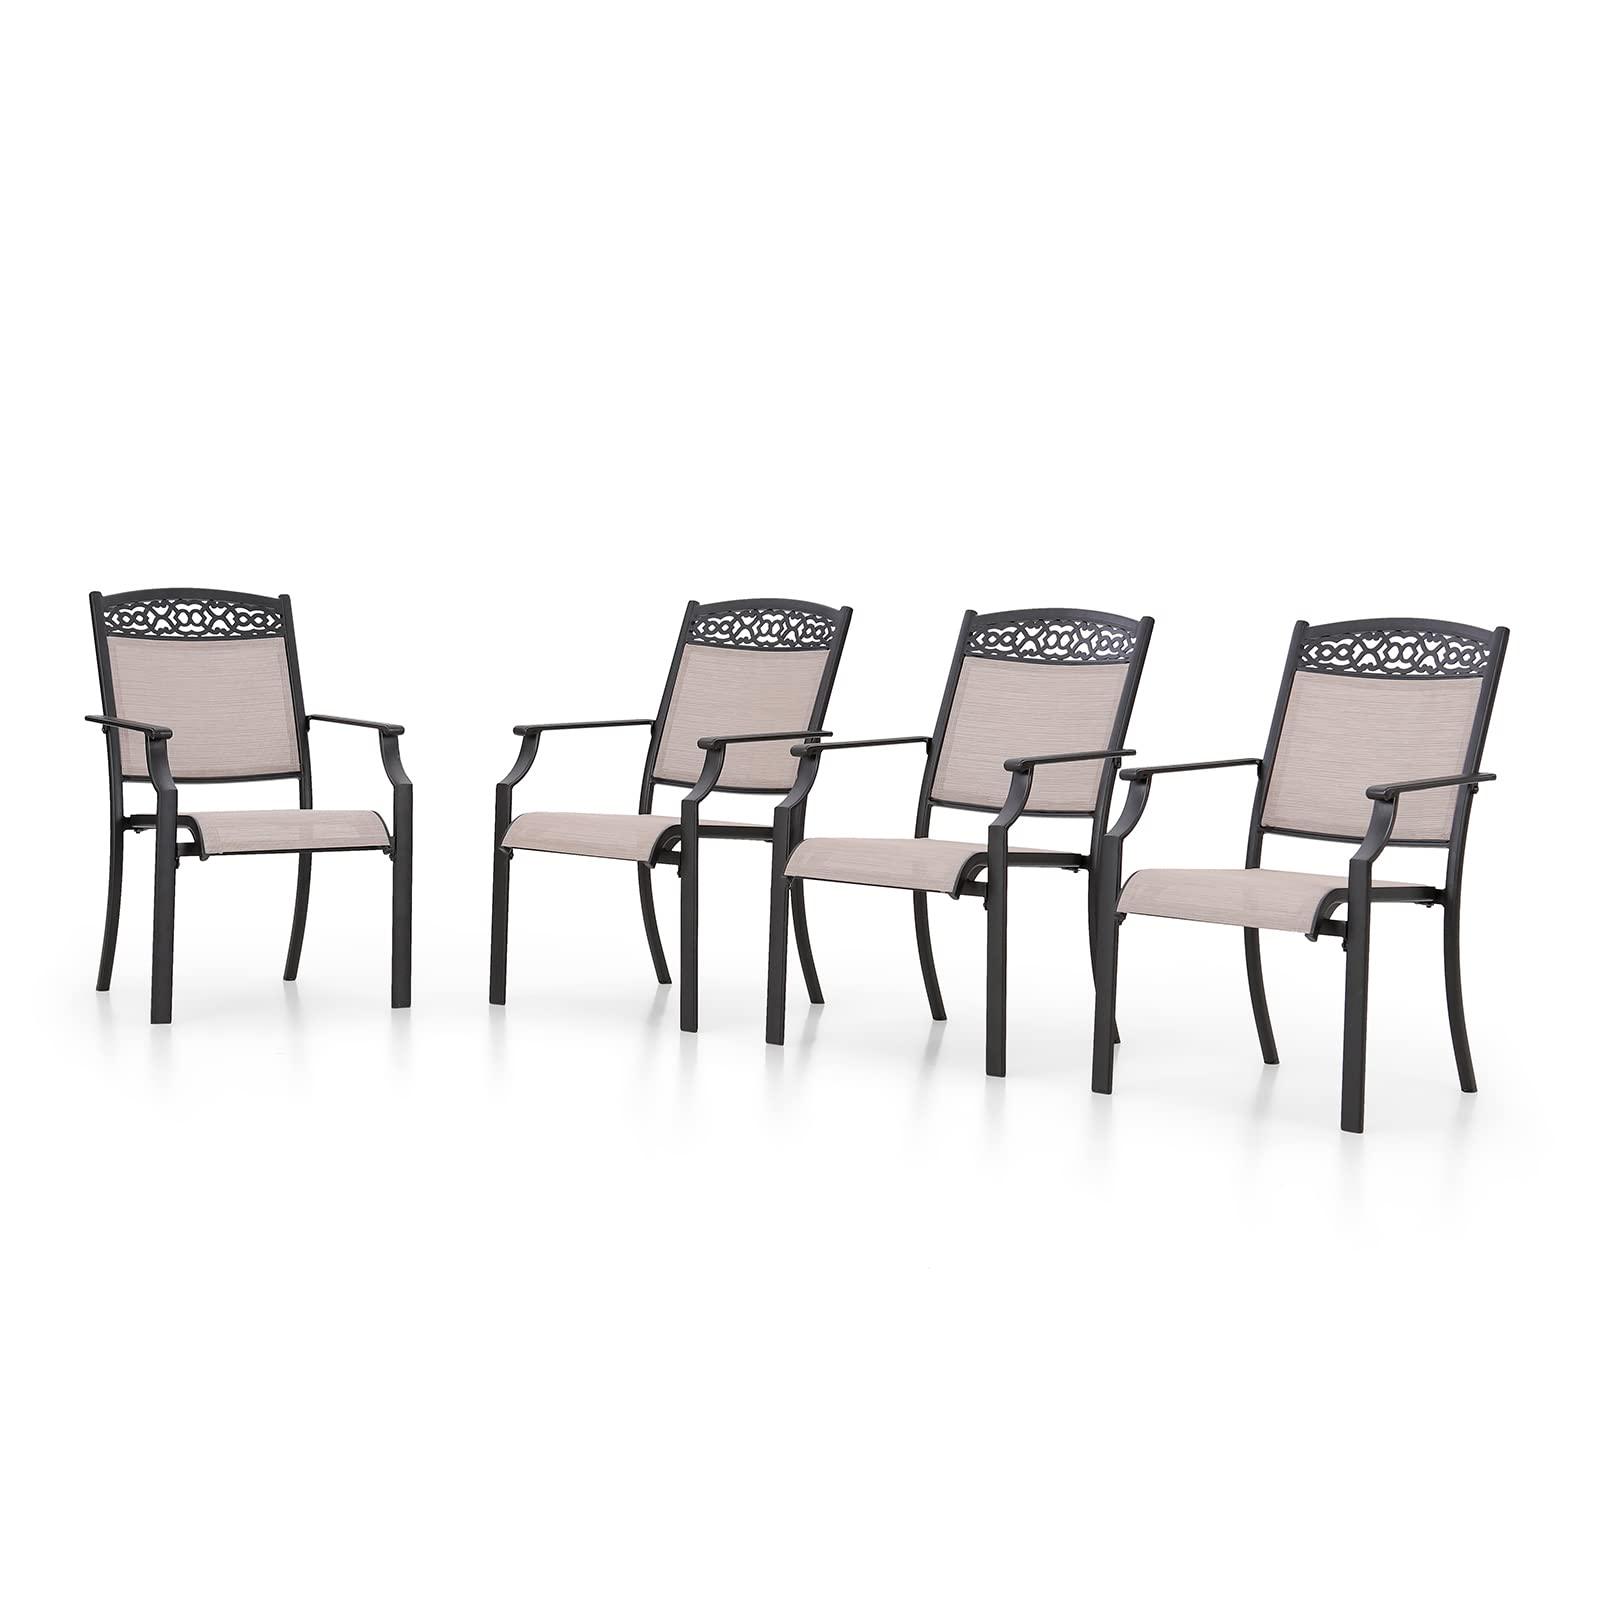 PHI VILLA Outdoor Cast Aluminum Patio Dining Chairs Set of 4, Stackable Patio Sling Chairs with Armrest for Deck, Garden, Terrace, Yard - CookCave